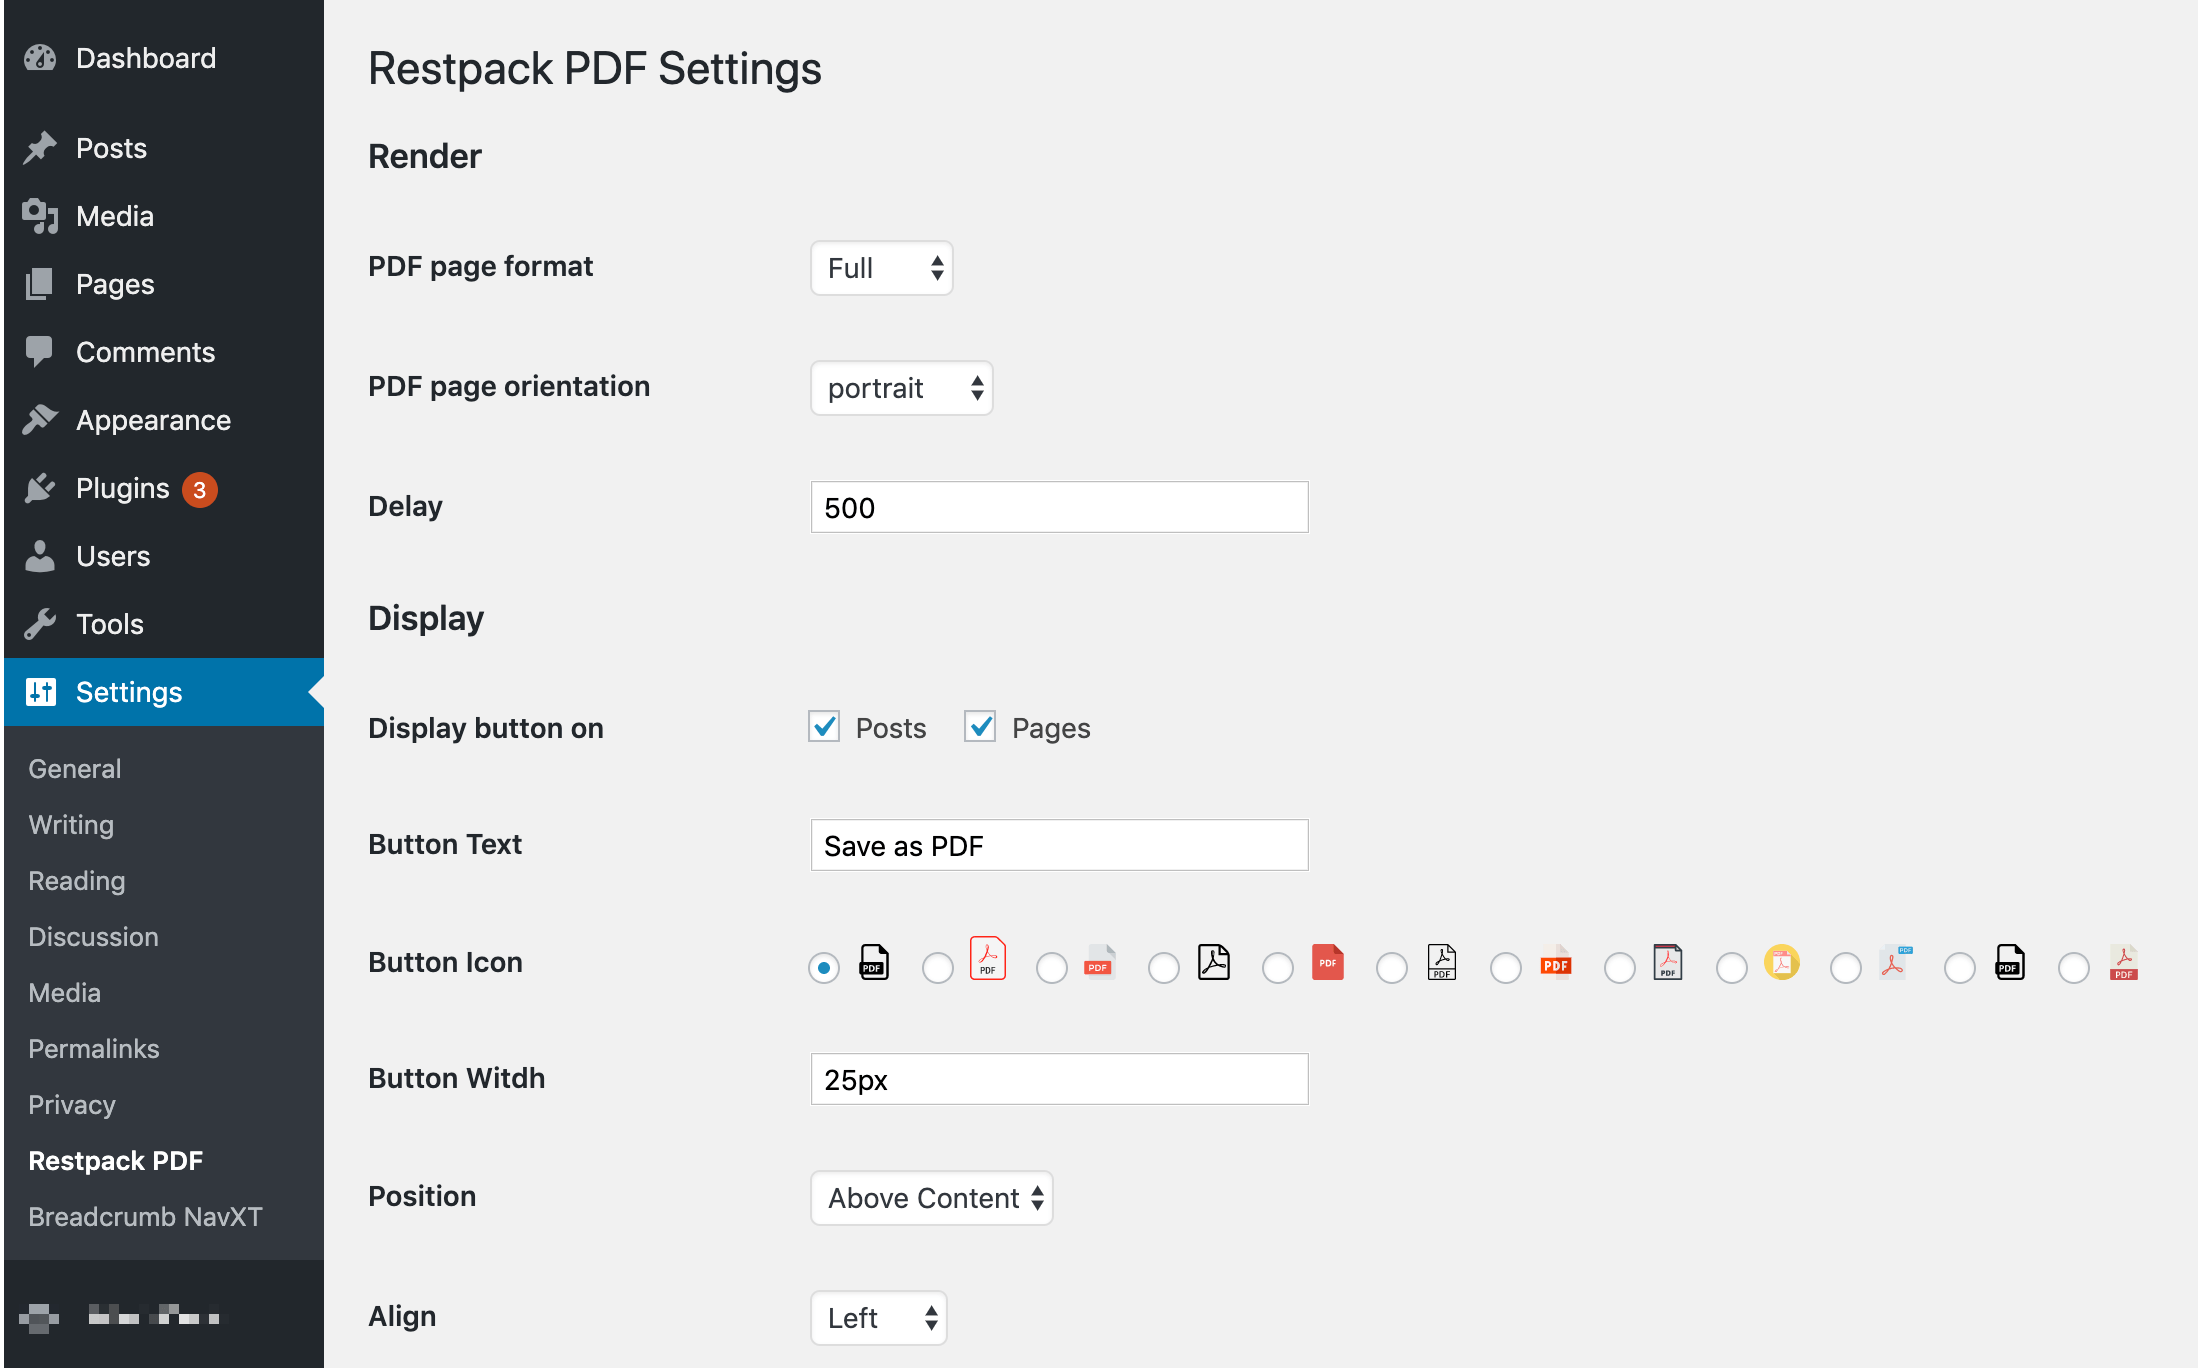 You can select different icons and text from backend for your download button